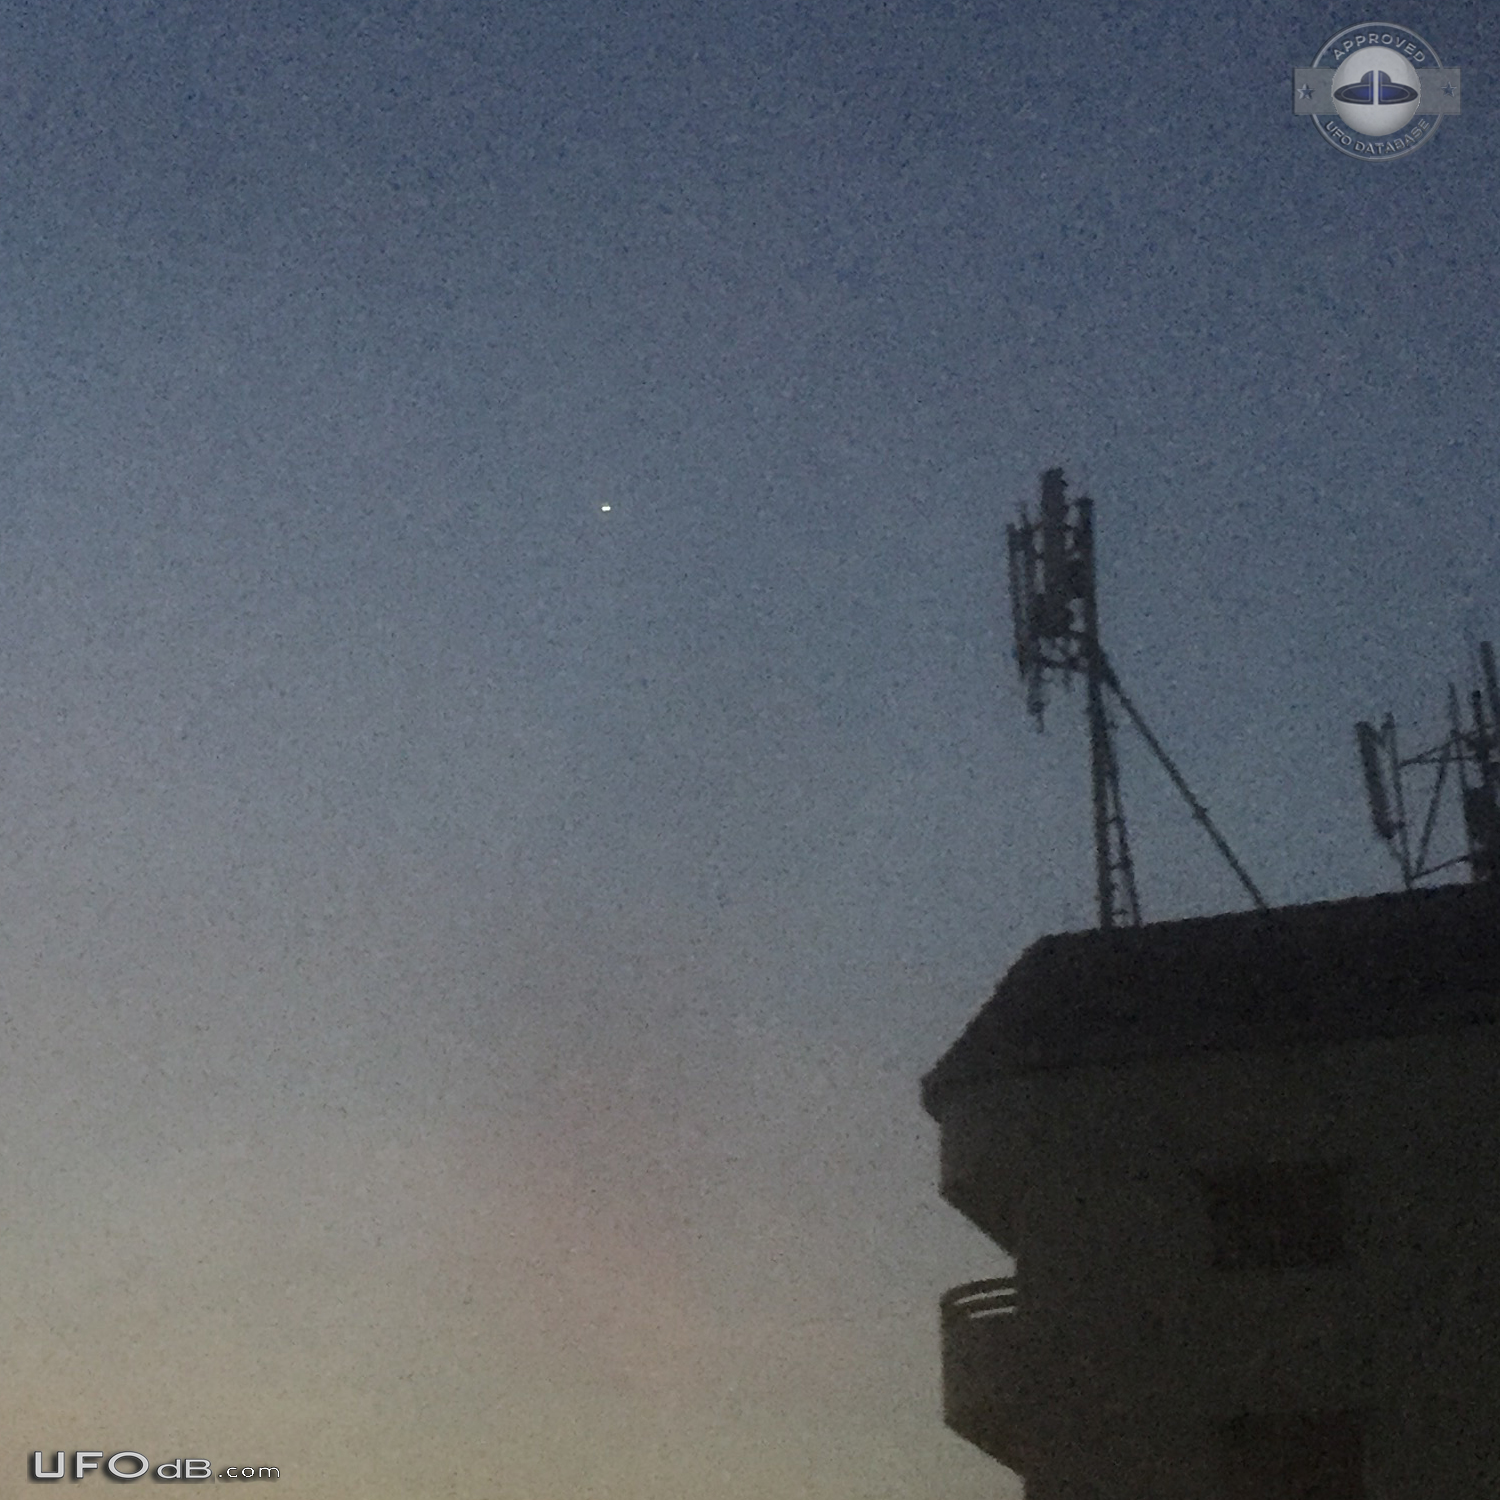 Very bright UFO seemed to have tentacles - Bangkok Thailand 2017 UFO Picture #805-3